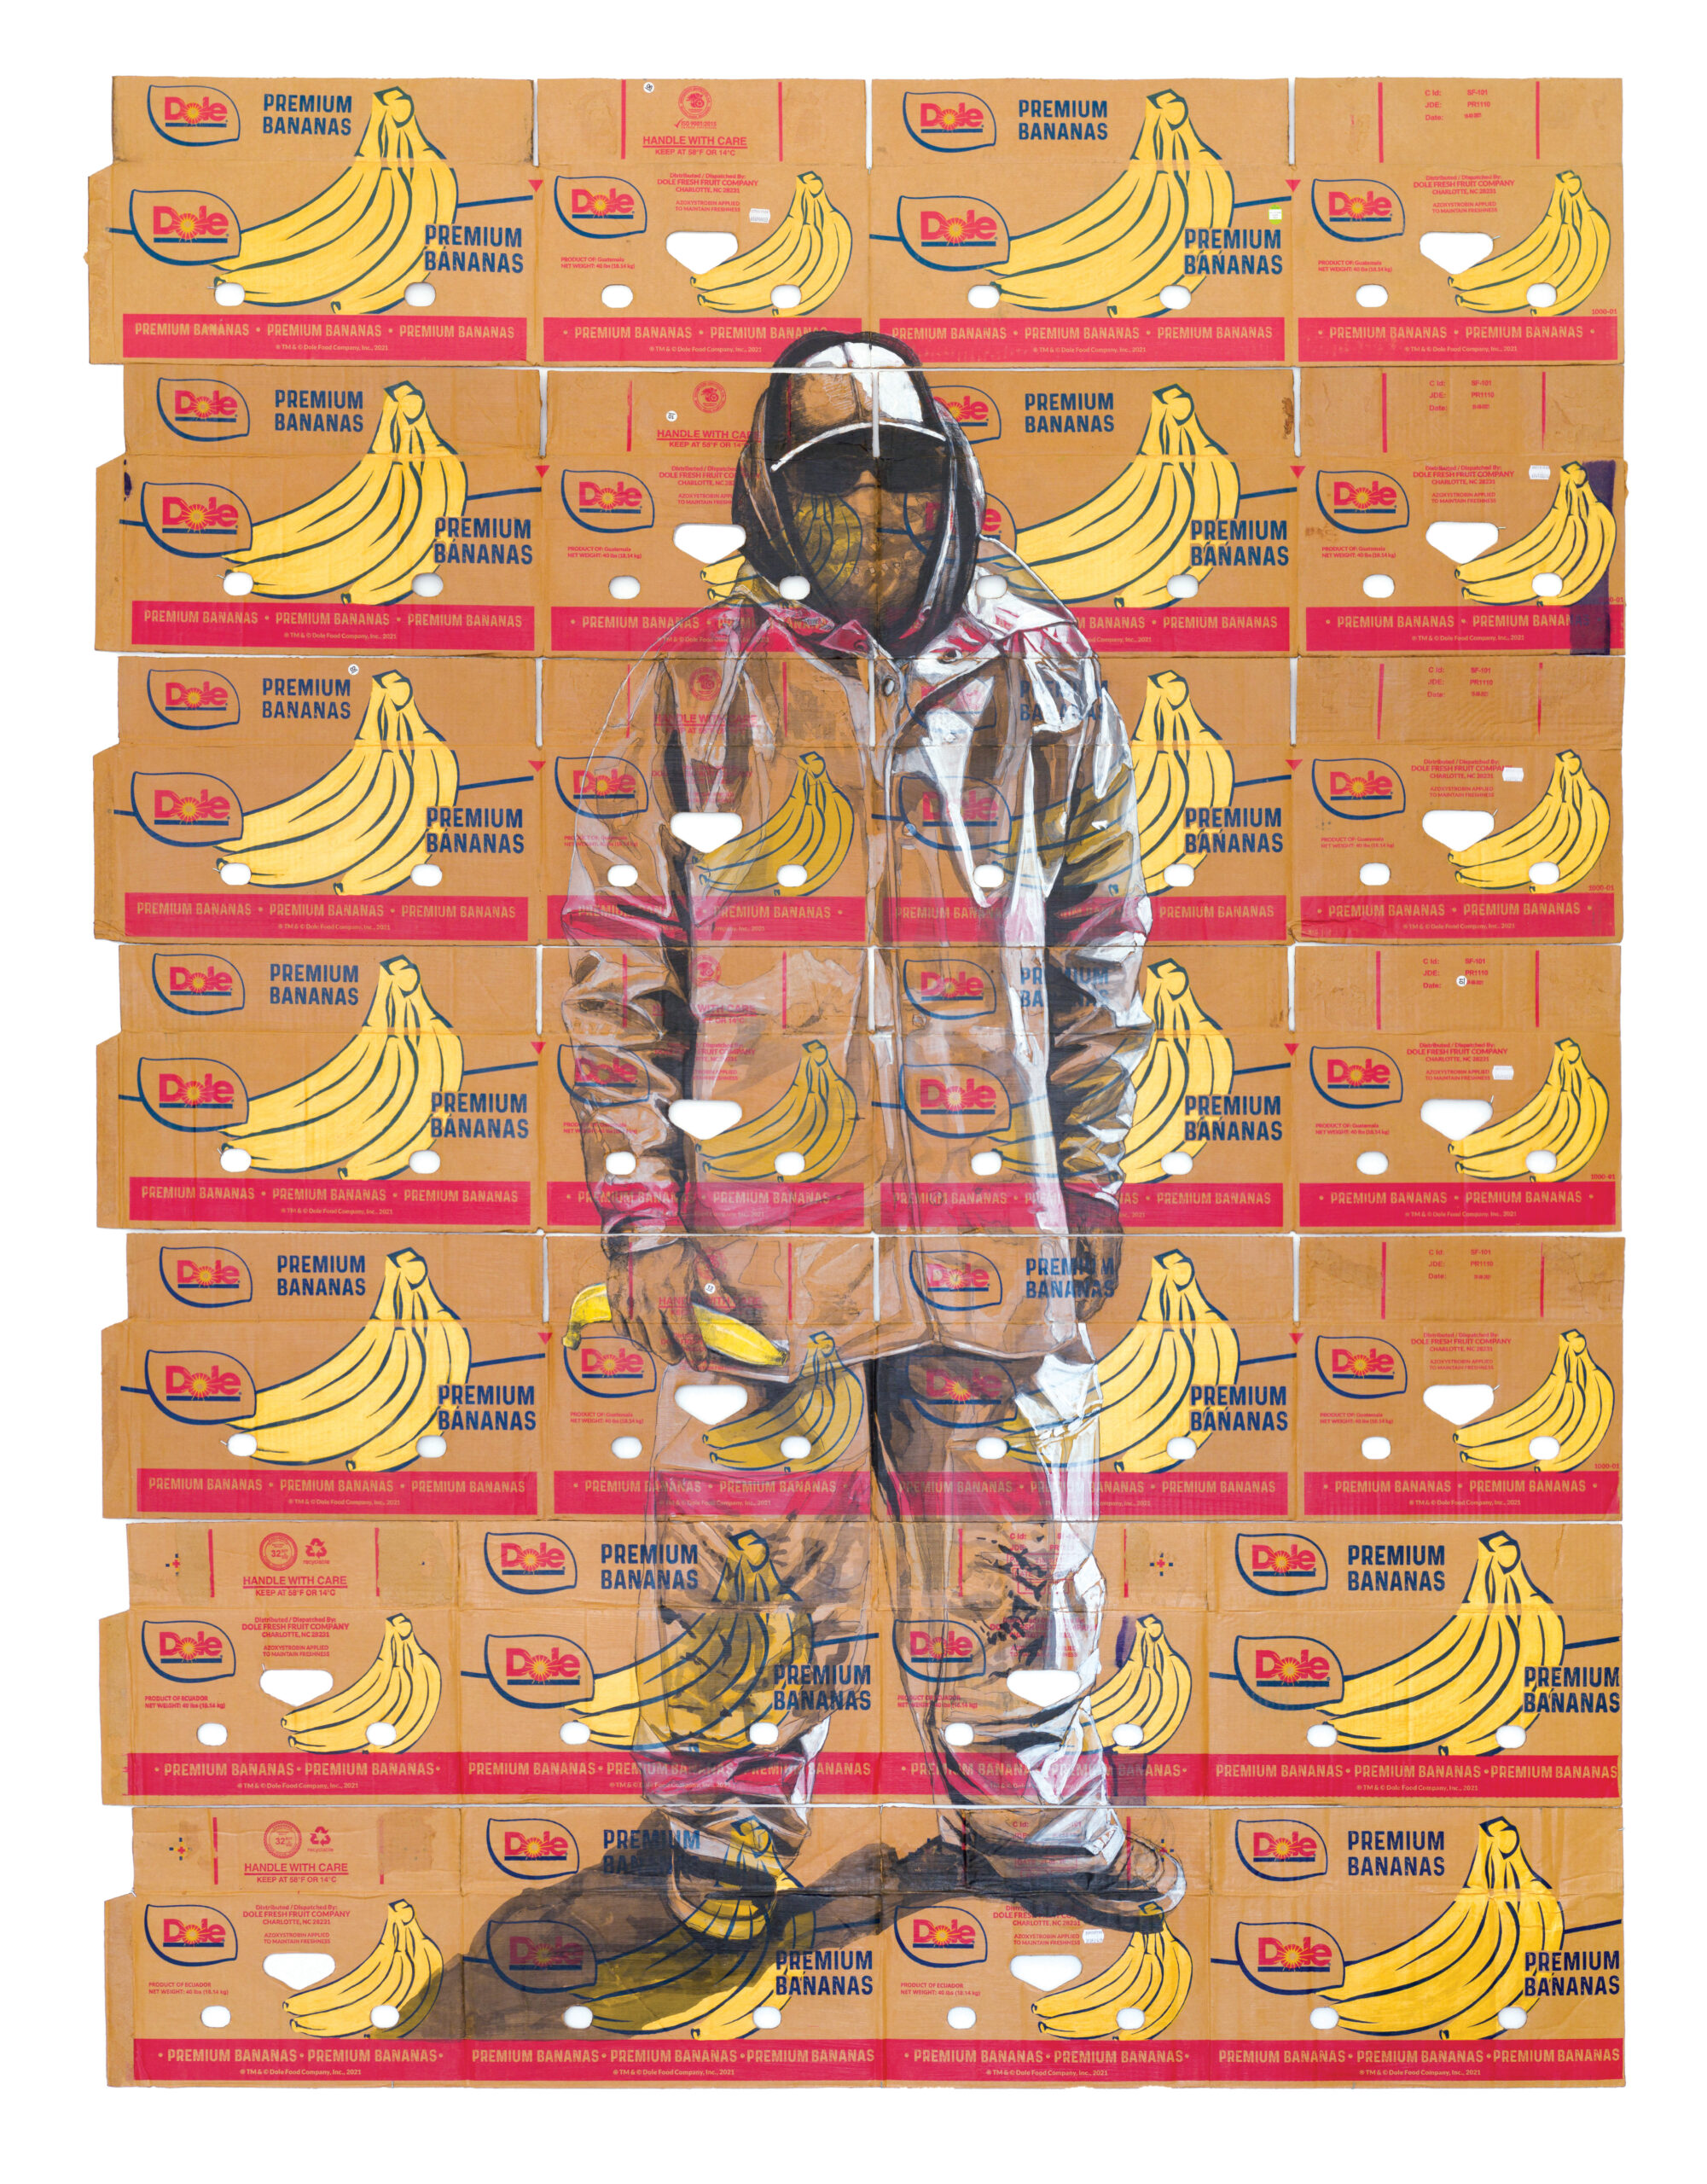 Man in farmworker's suit painted on banana box